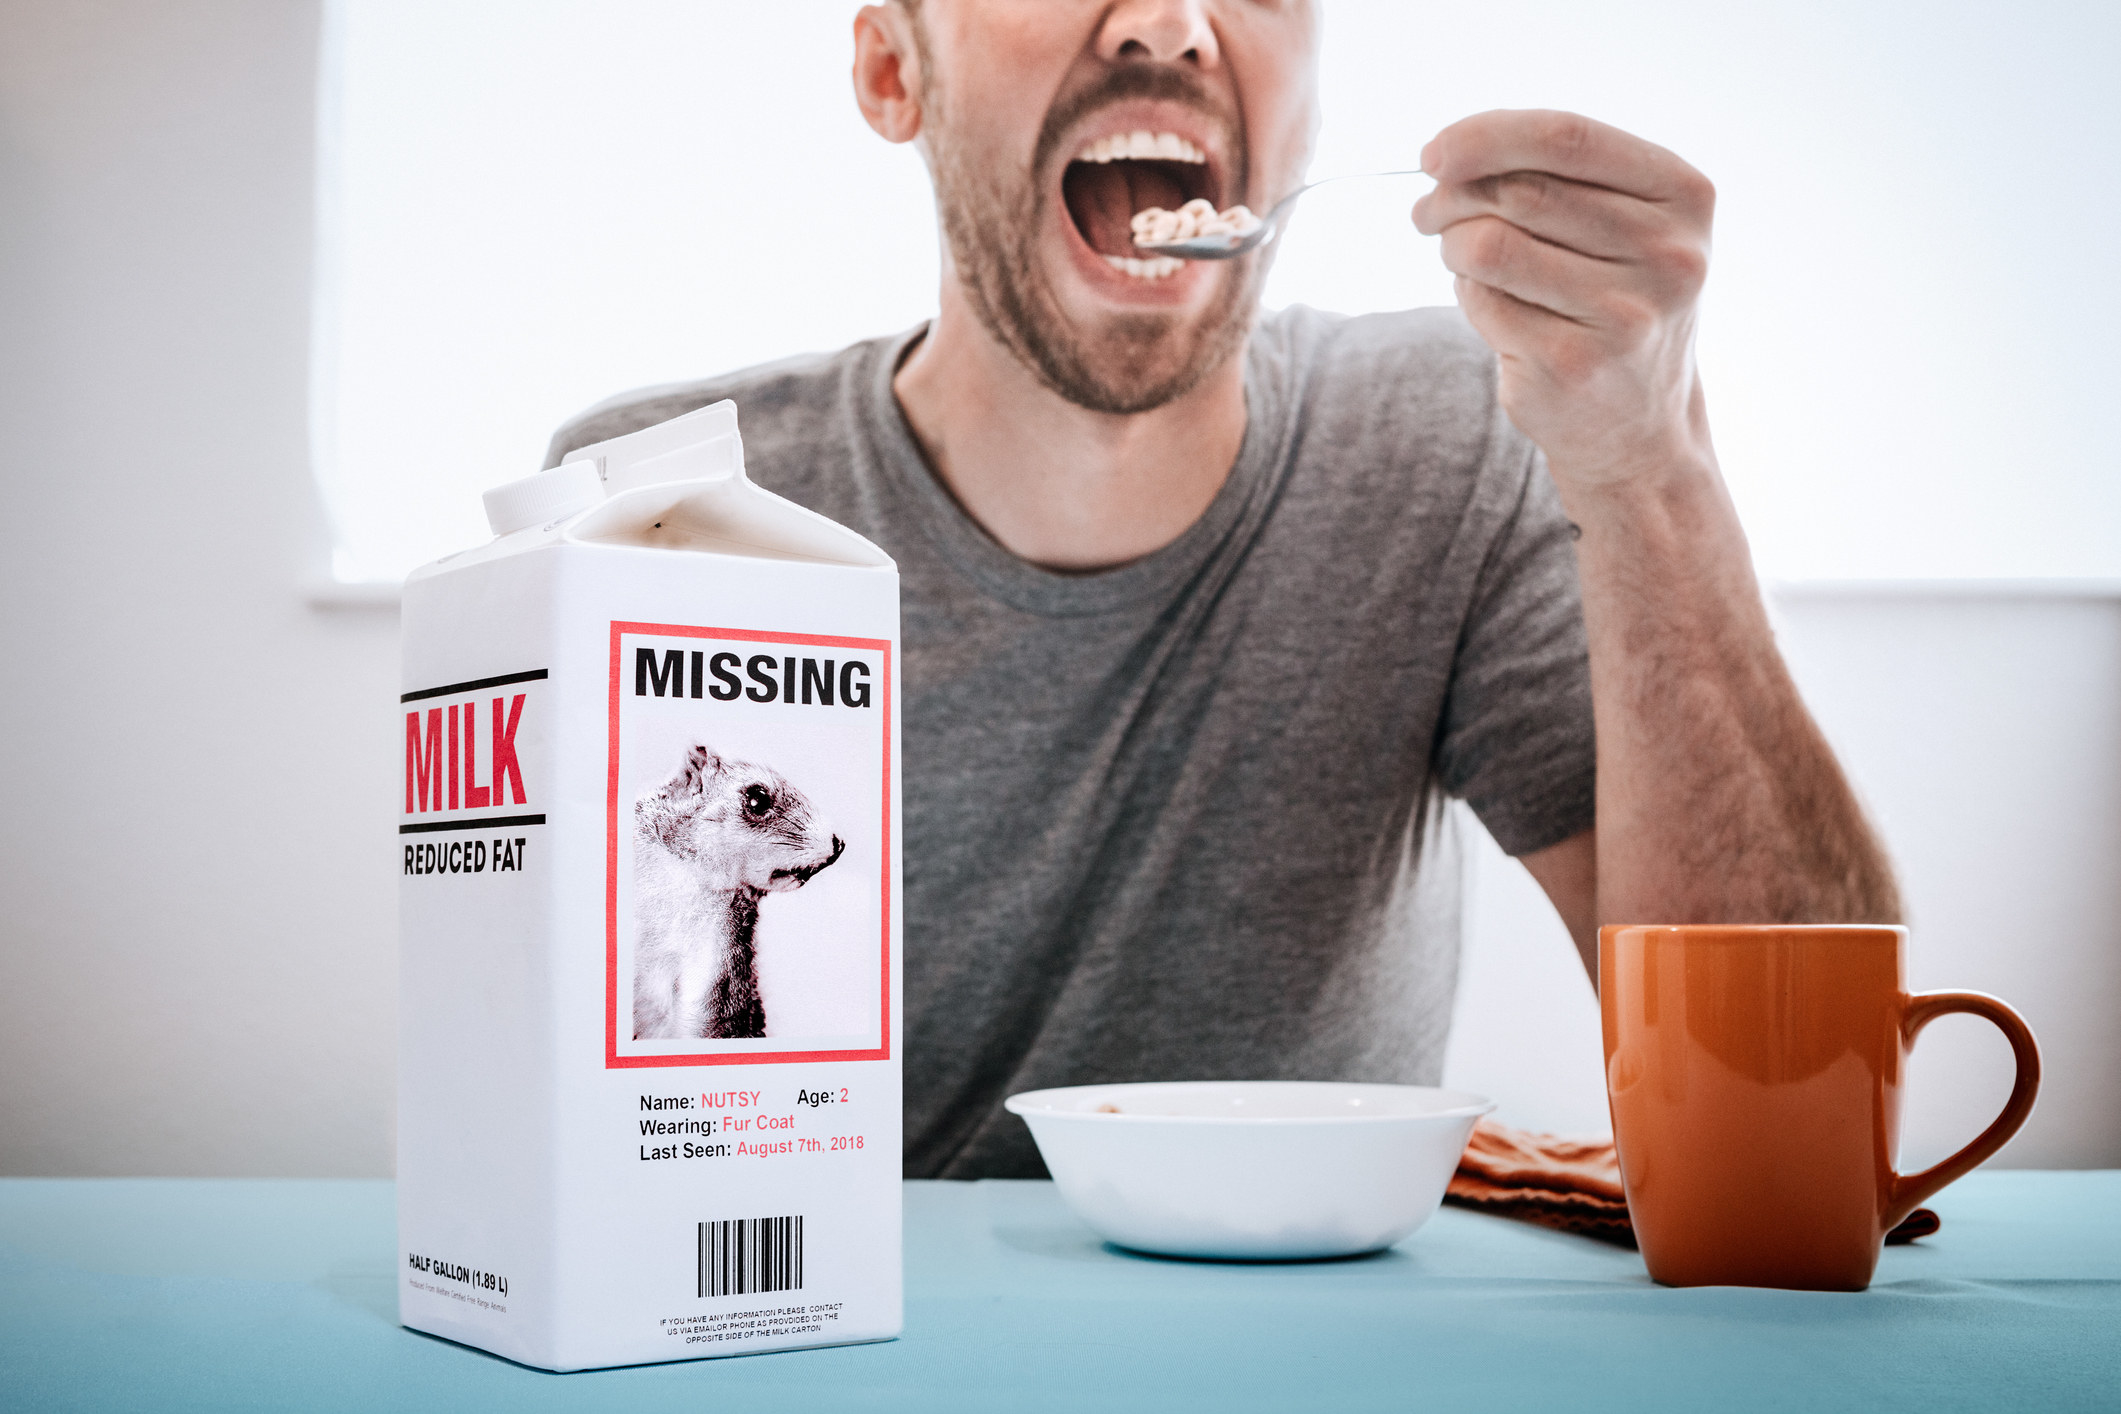 A man eating a bowl of cereal next to a carton of milk on the table with a &quot;Missing&quot; poster on the carton